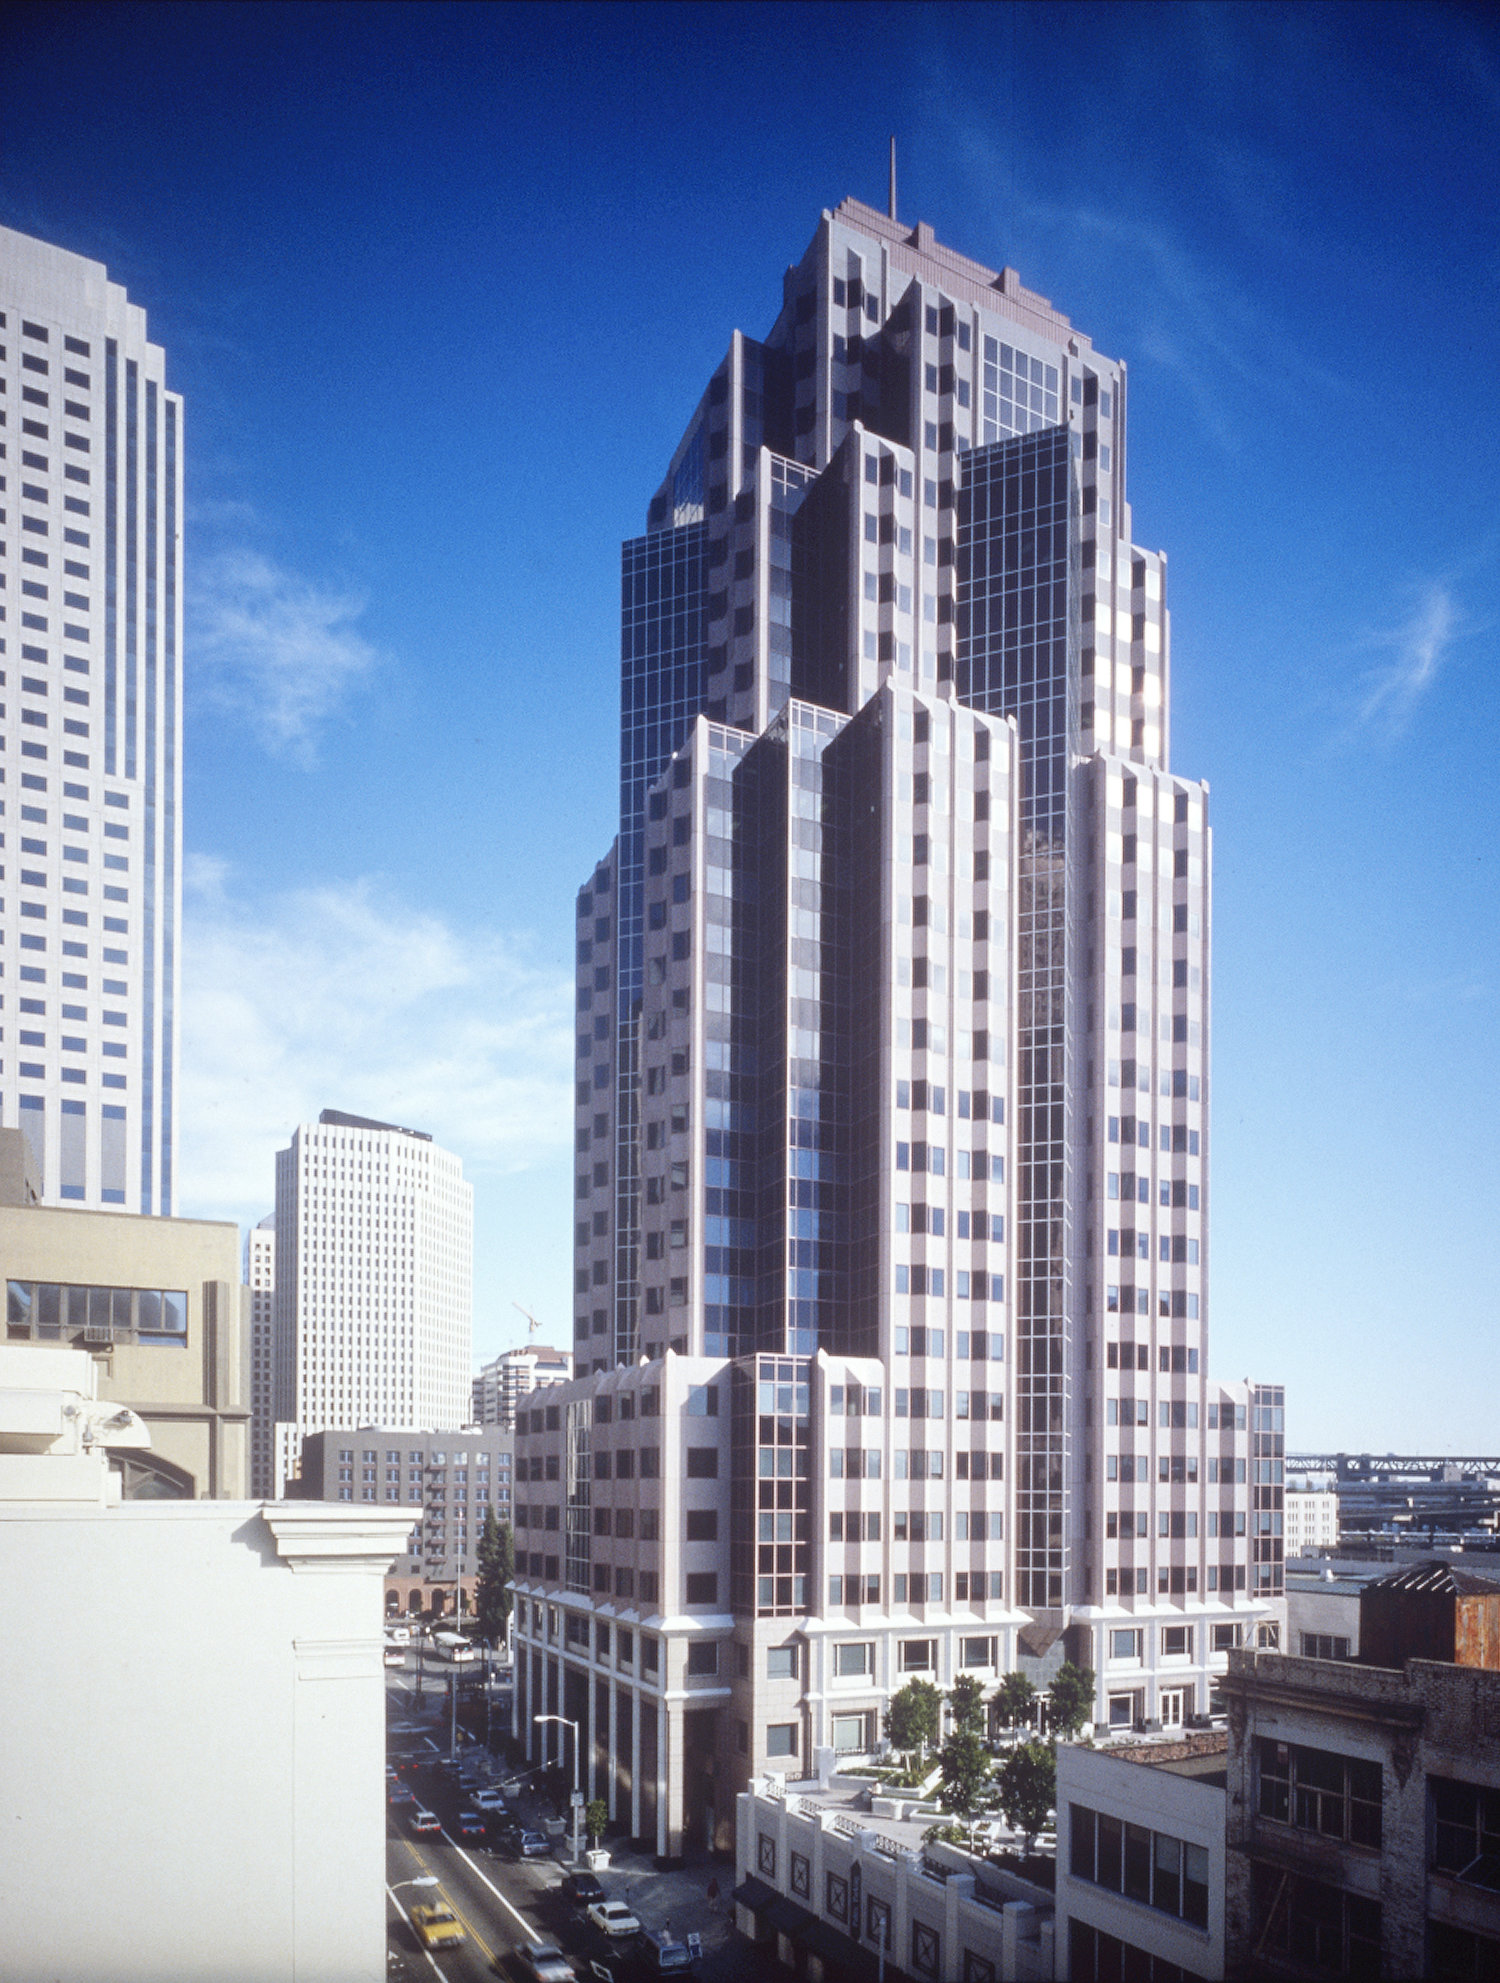 100 First Plaza, image from Patrinely Group LLC